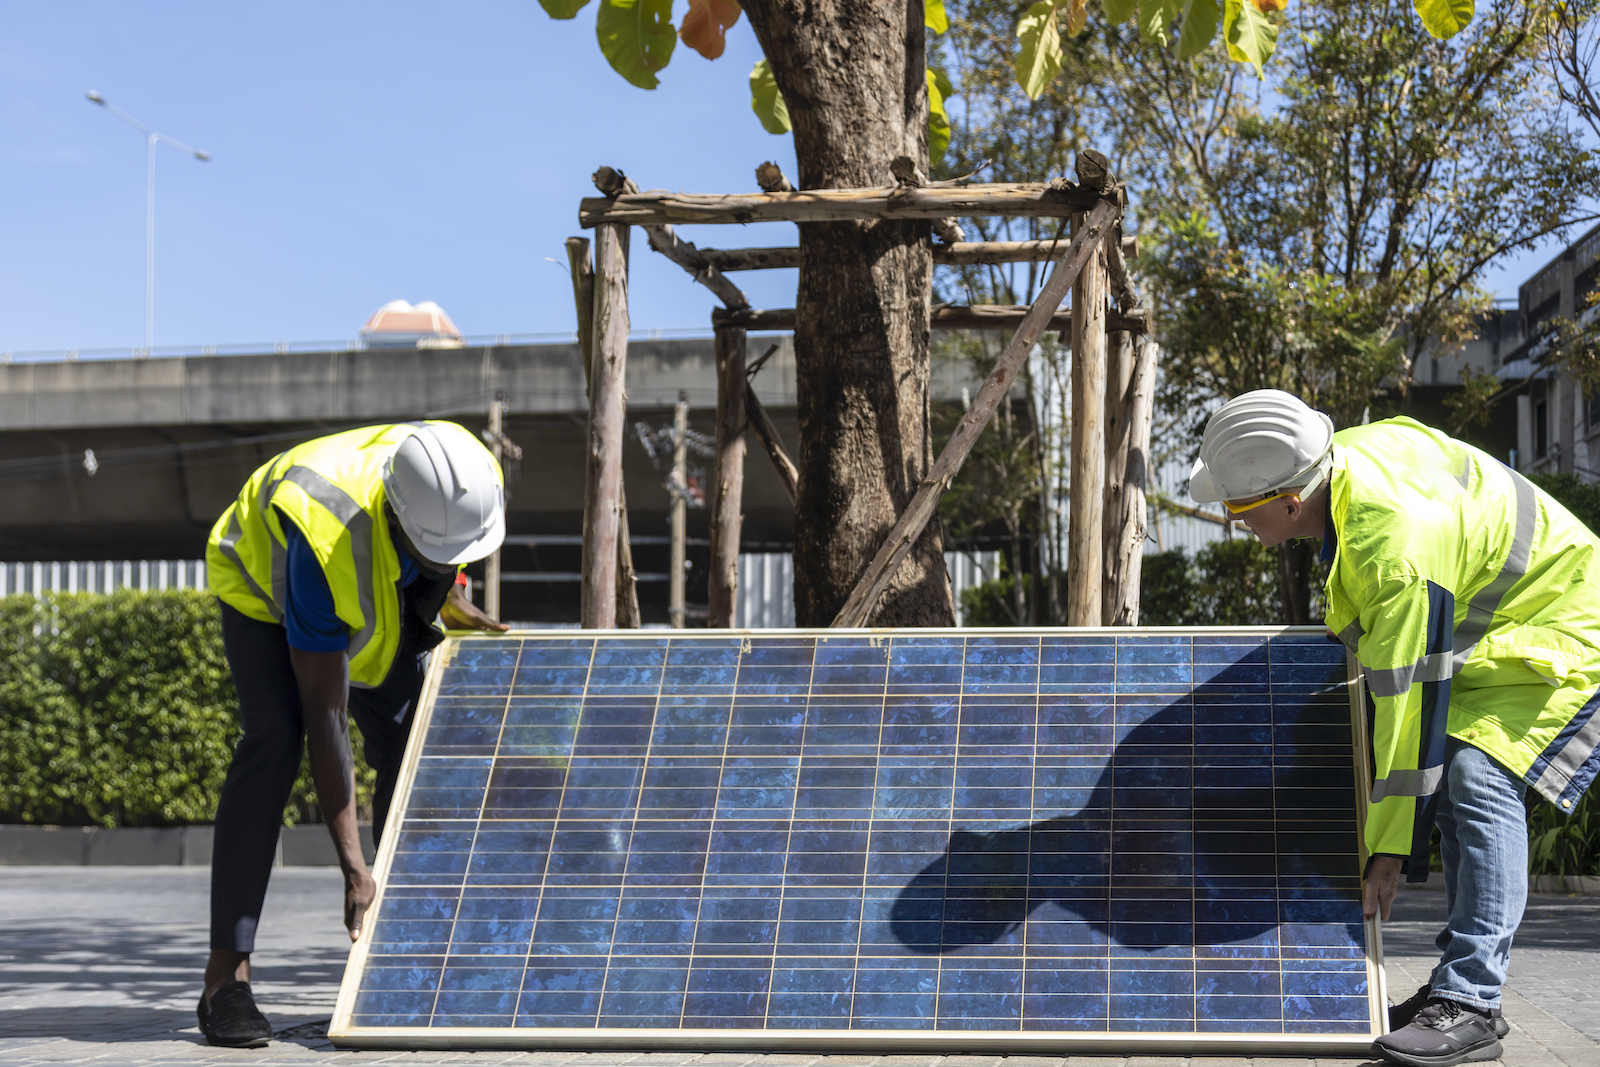 Two workers in reflective tops working on installing solar panel on the rooftop of the house